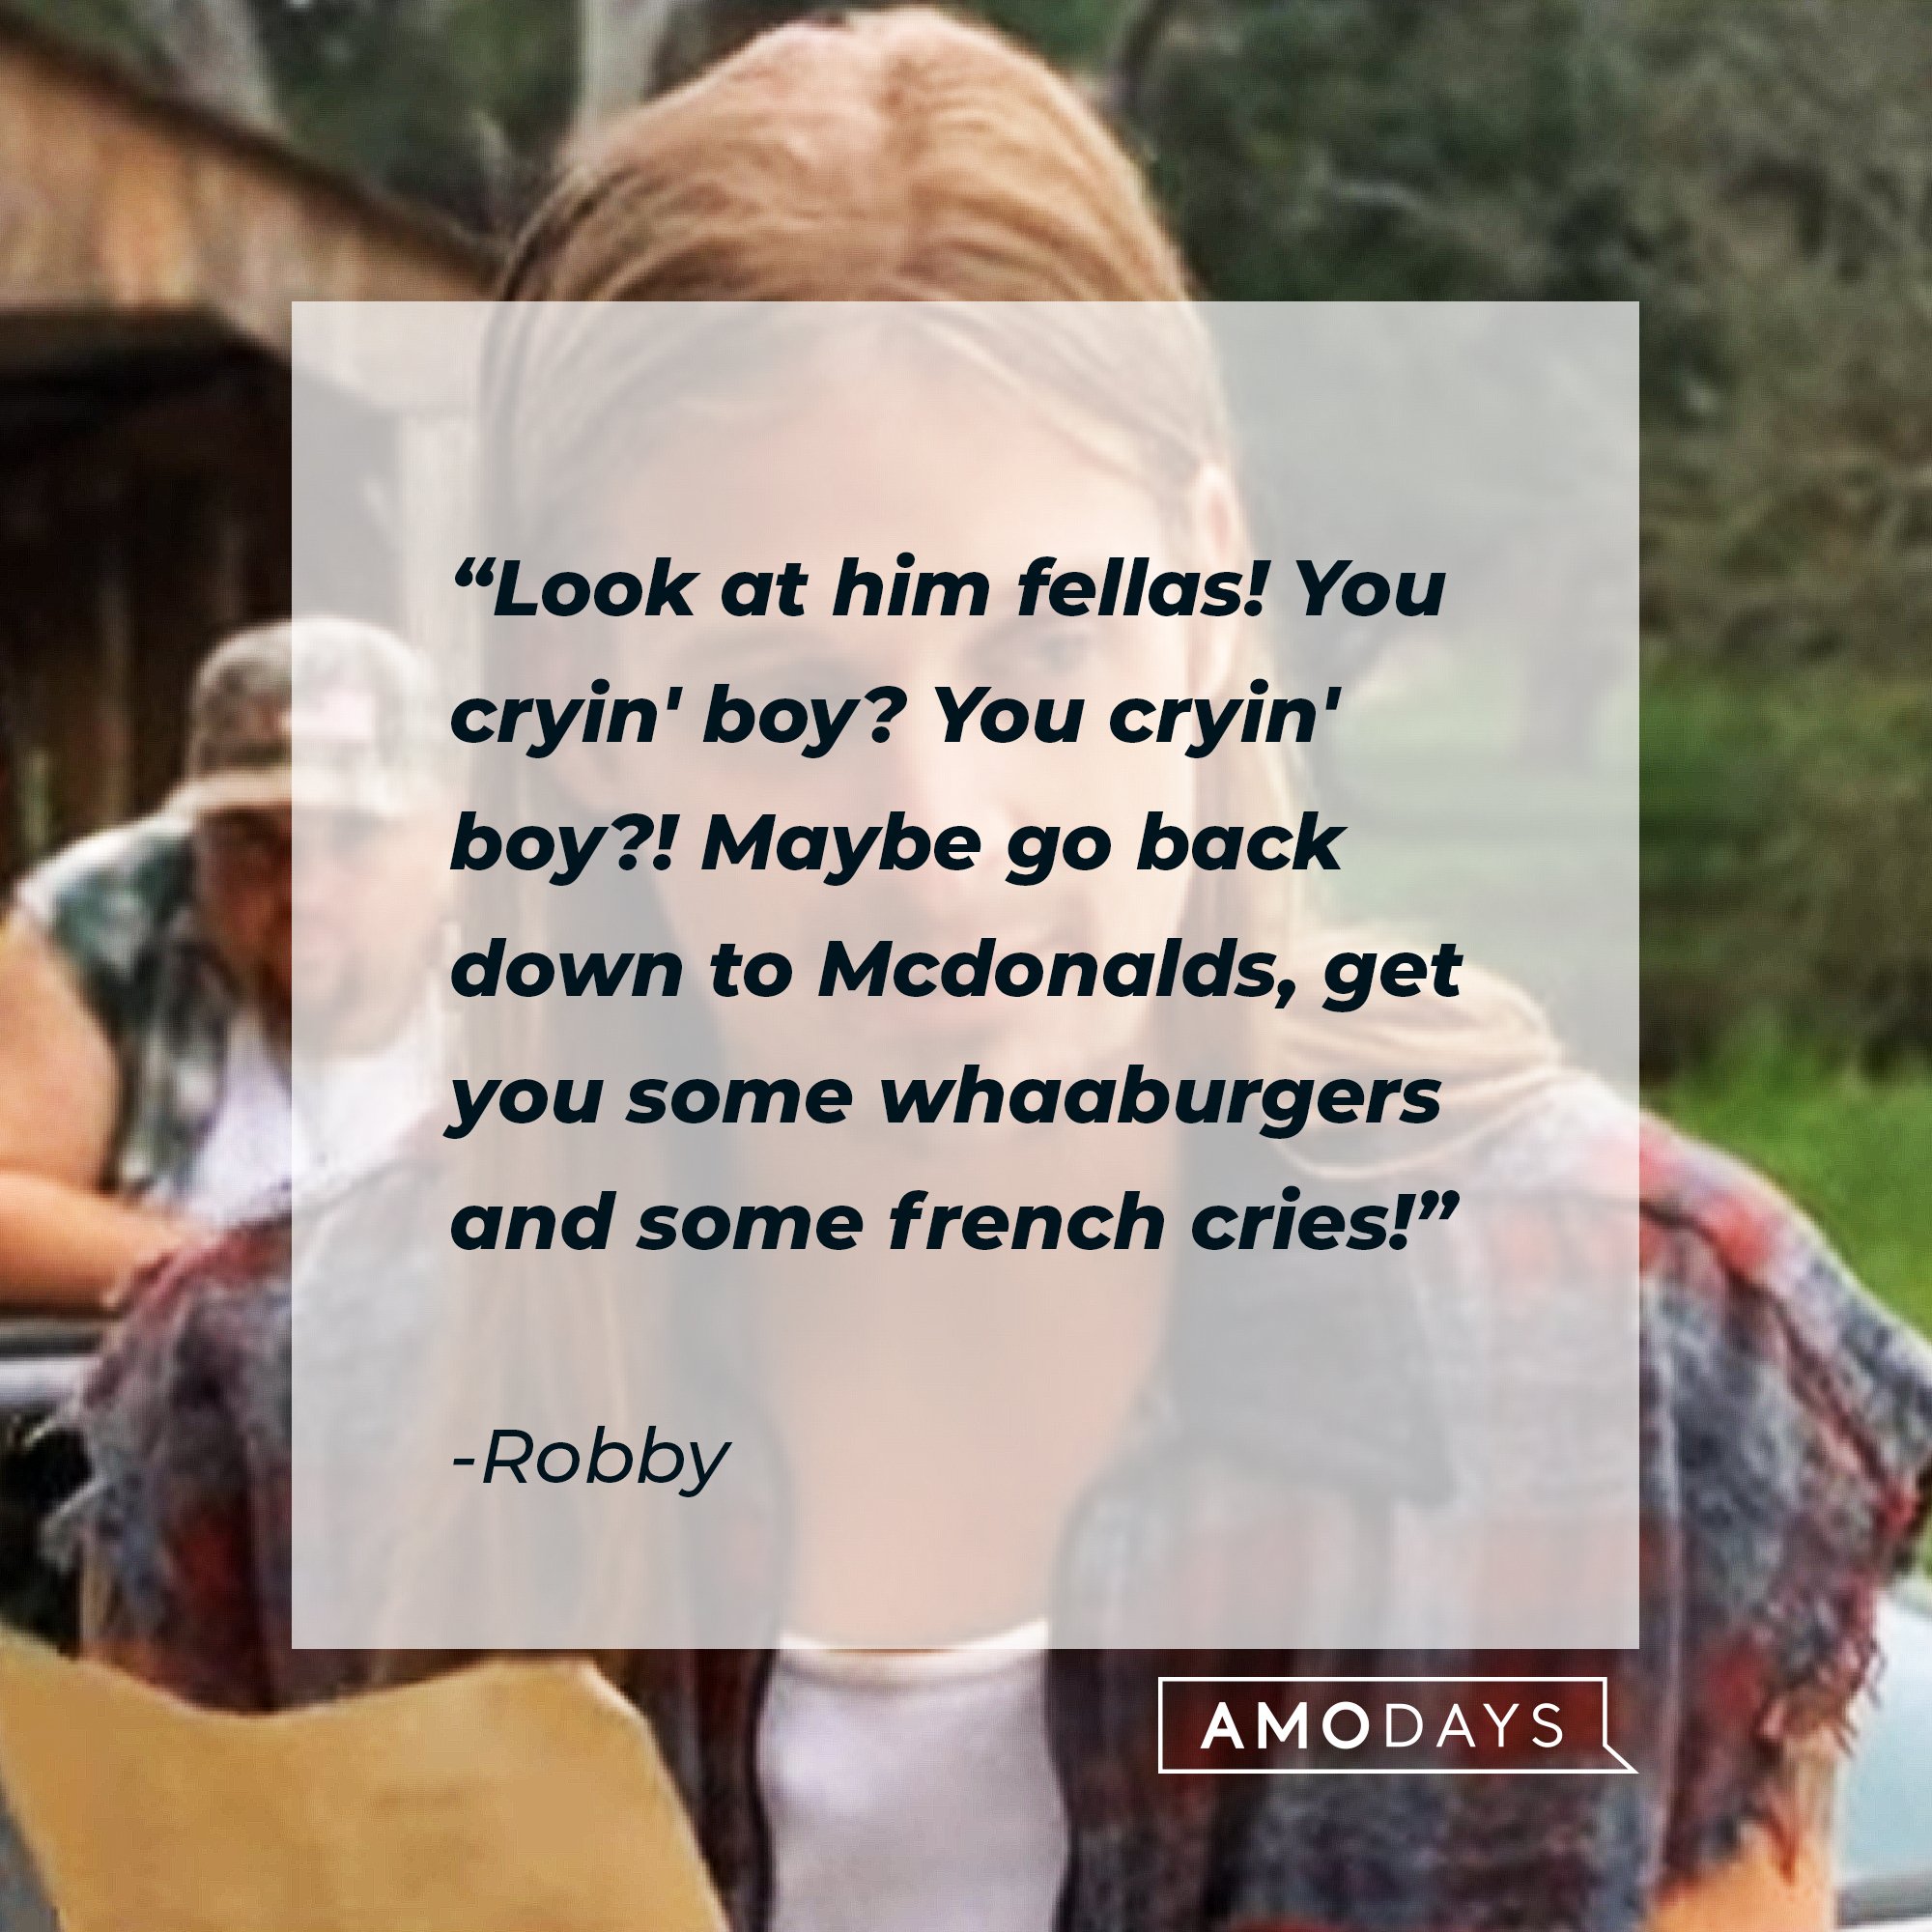  Robby's quote: "Look at him fellas! You cryin' boy? You cryin' boy?! Maybe go back down to Mcdonalds, get you some whaaburgers and some french cries!"| Image: AmoDays